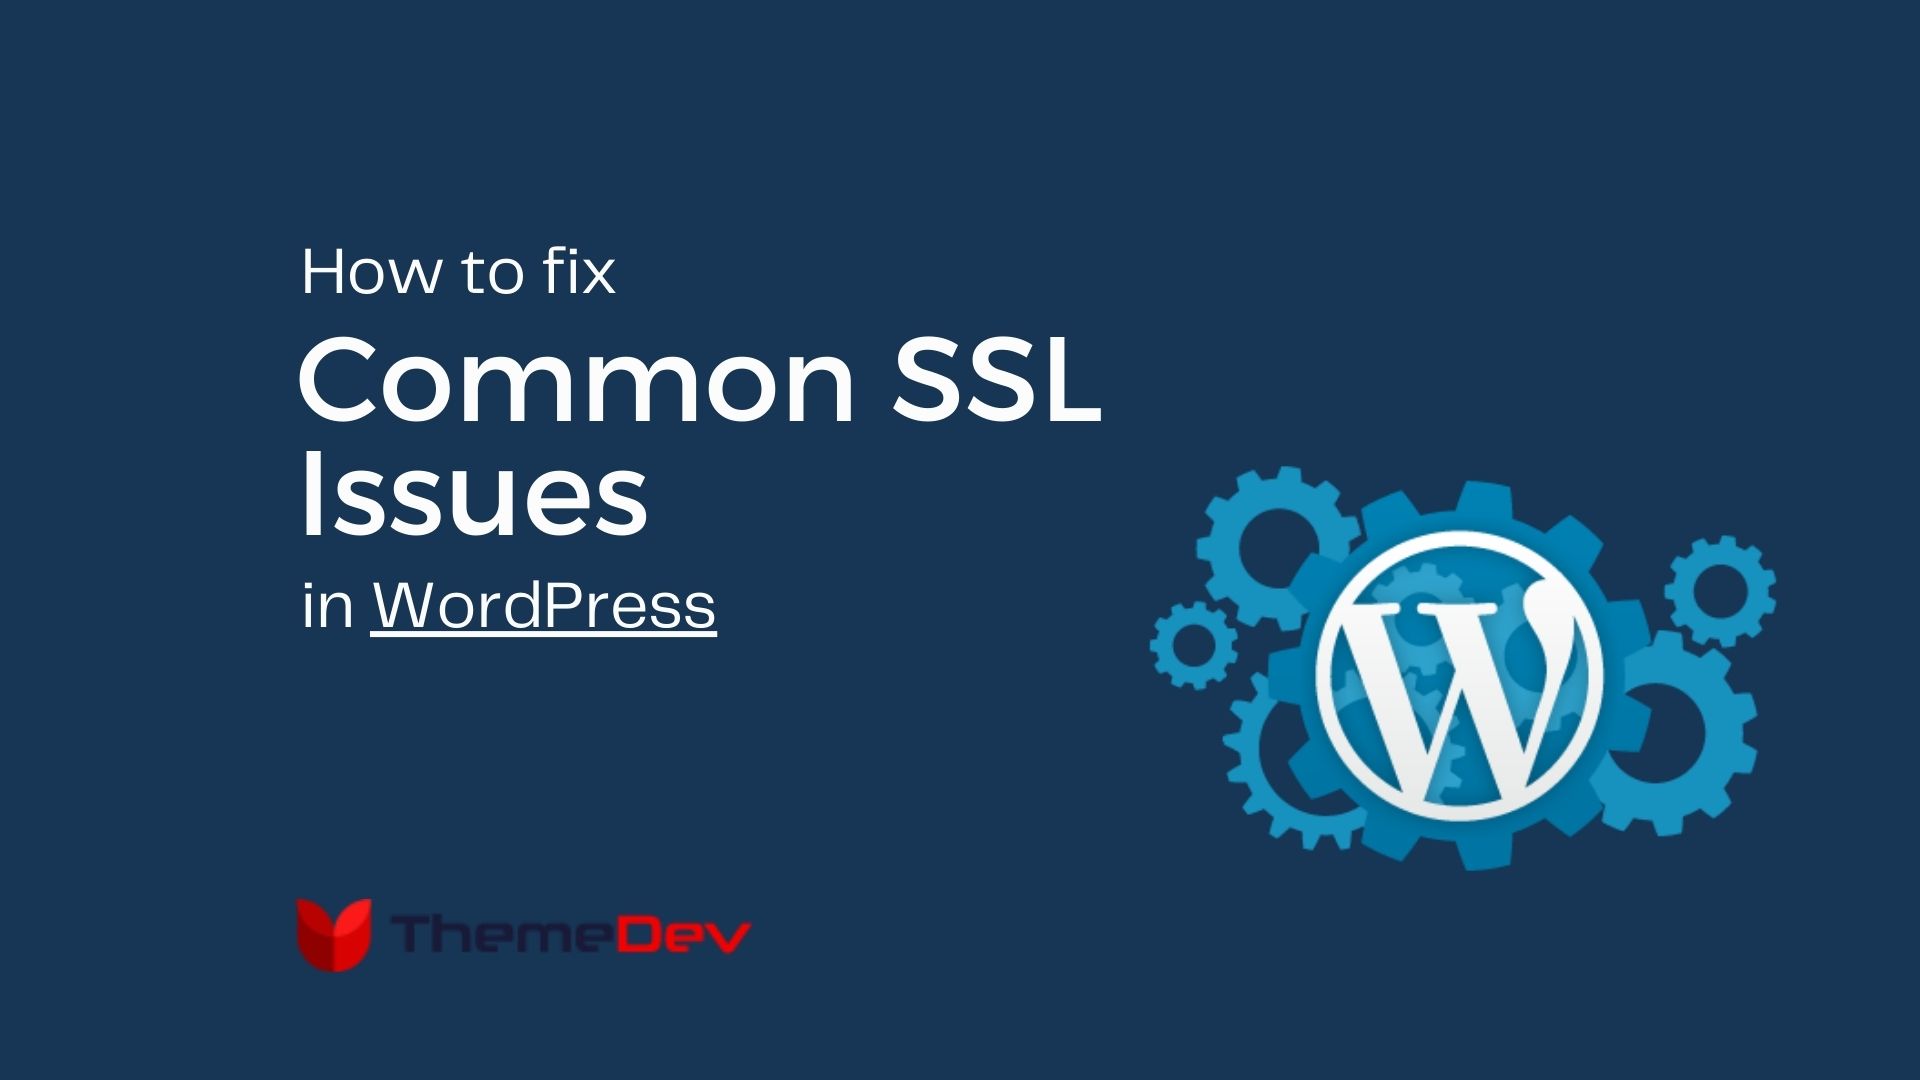 Step by Step Guide to Fix Common SSL Issues in WordPress